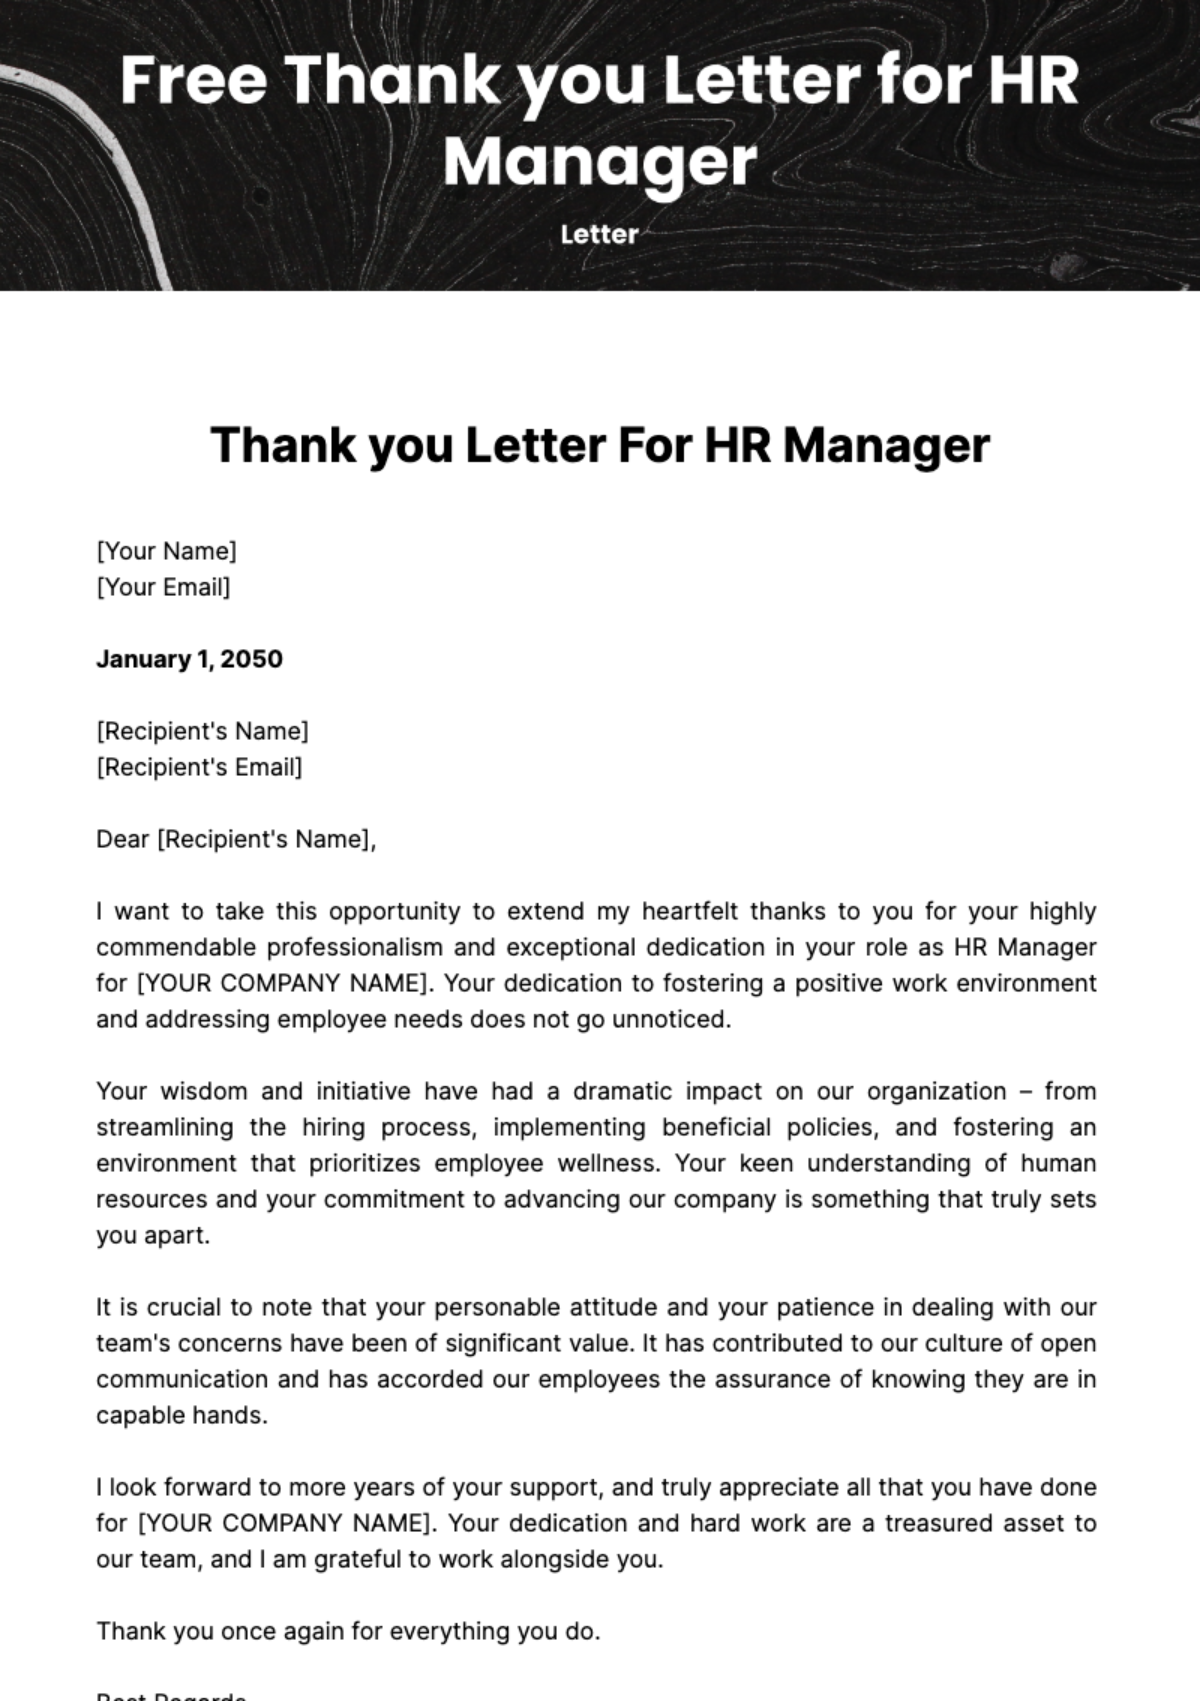 Thank you Letter for HR Manager Template